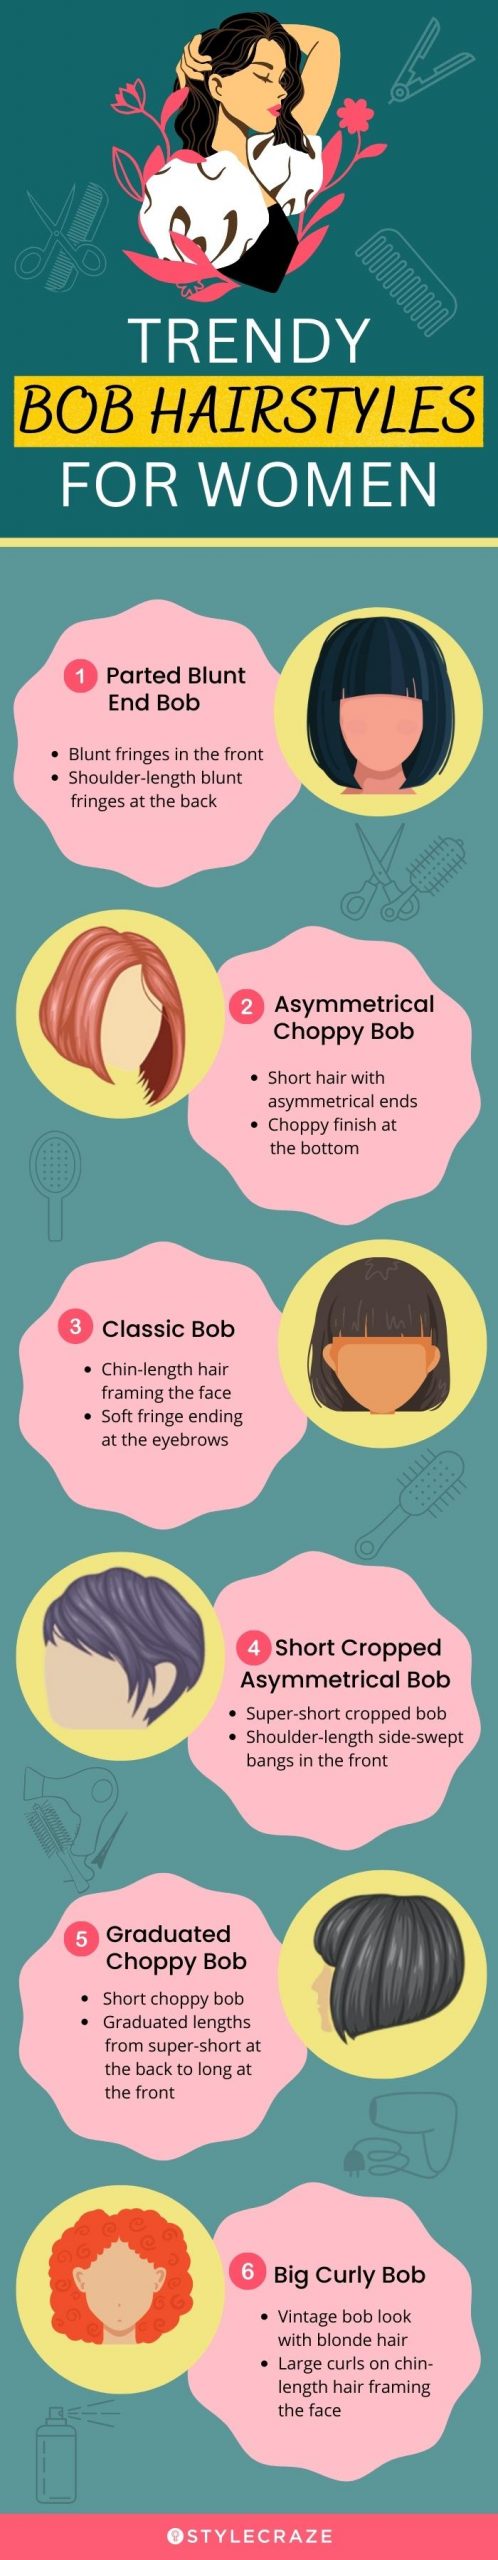 trendy bob hairstyles for women [infographic]